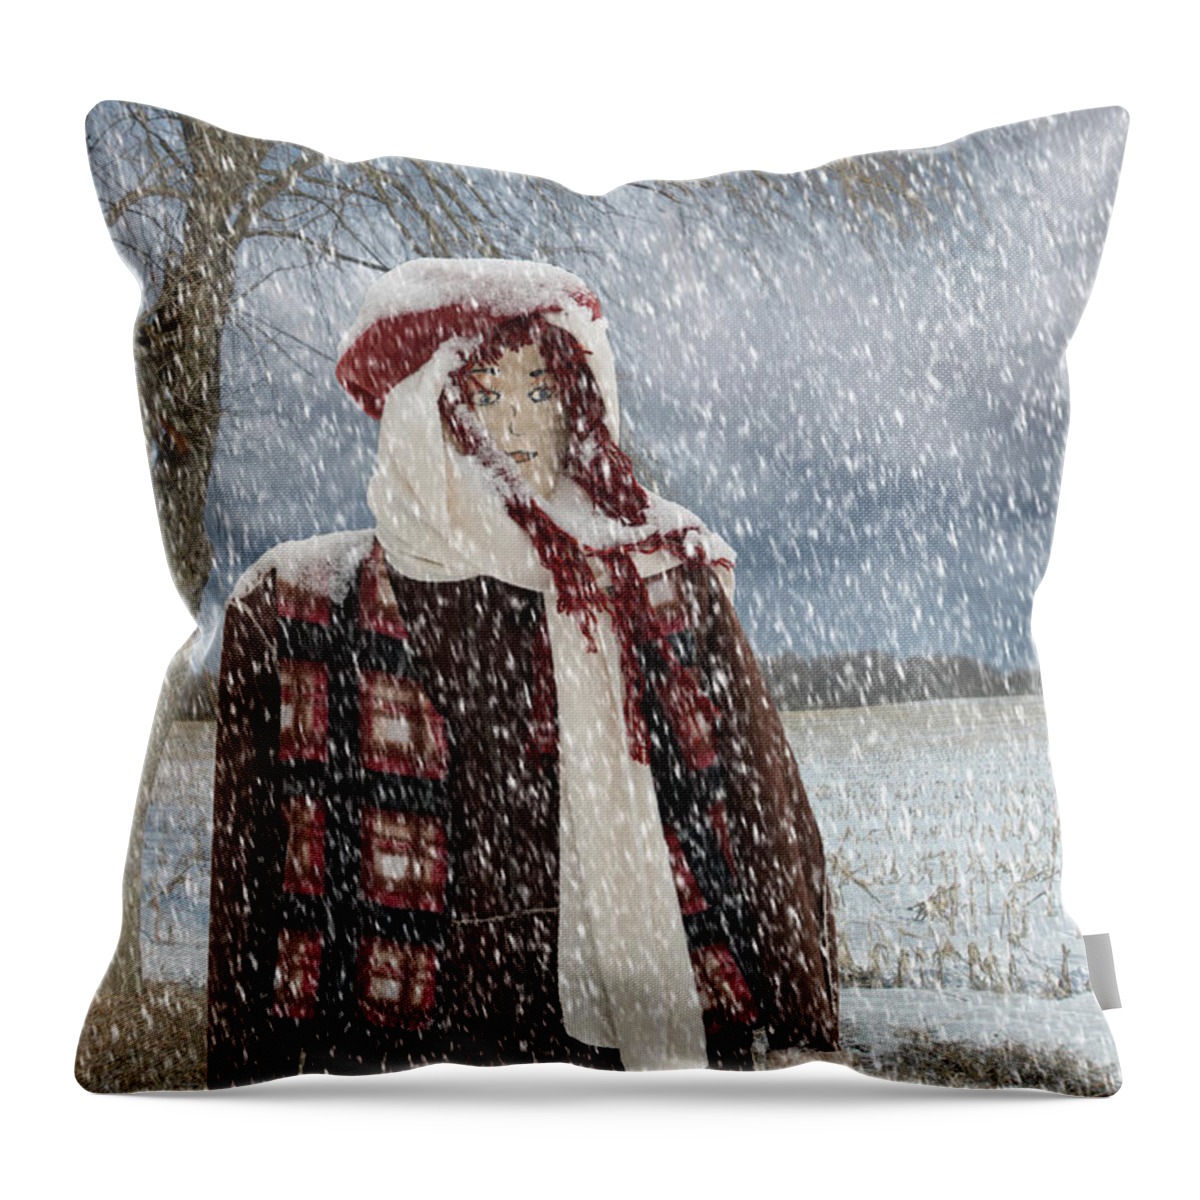 Snow Throw Pillow featuring the mixed media Snow Girl by Moira Law